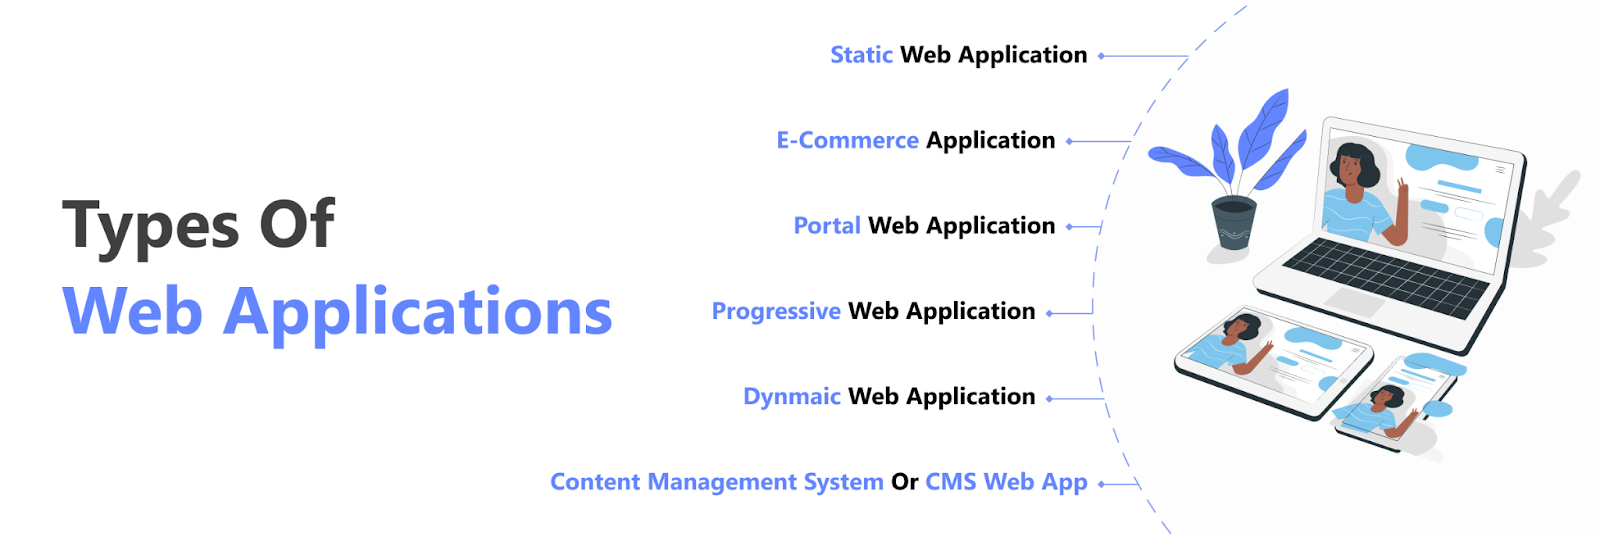 Types of Web Applications